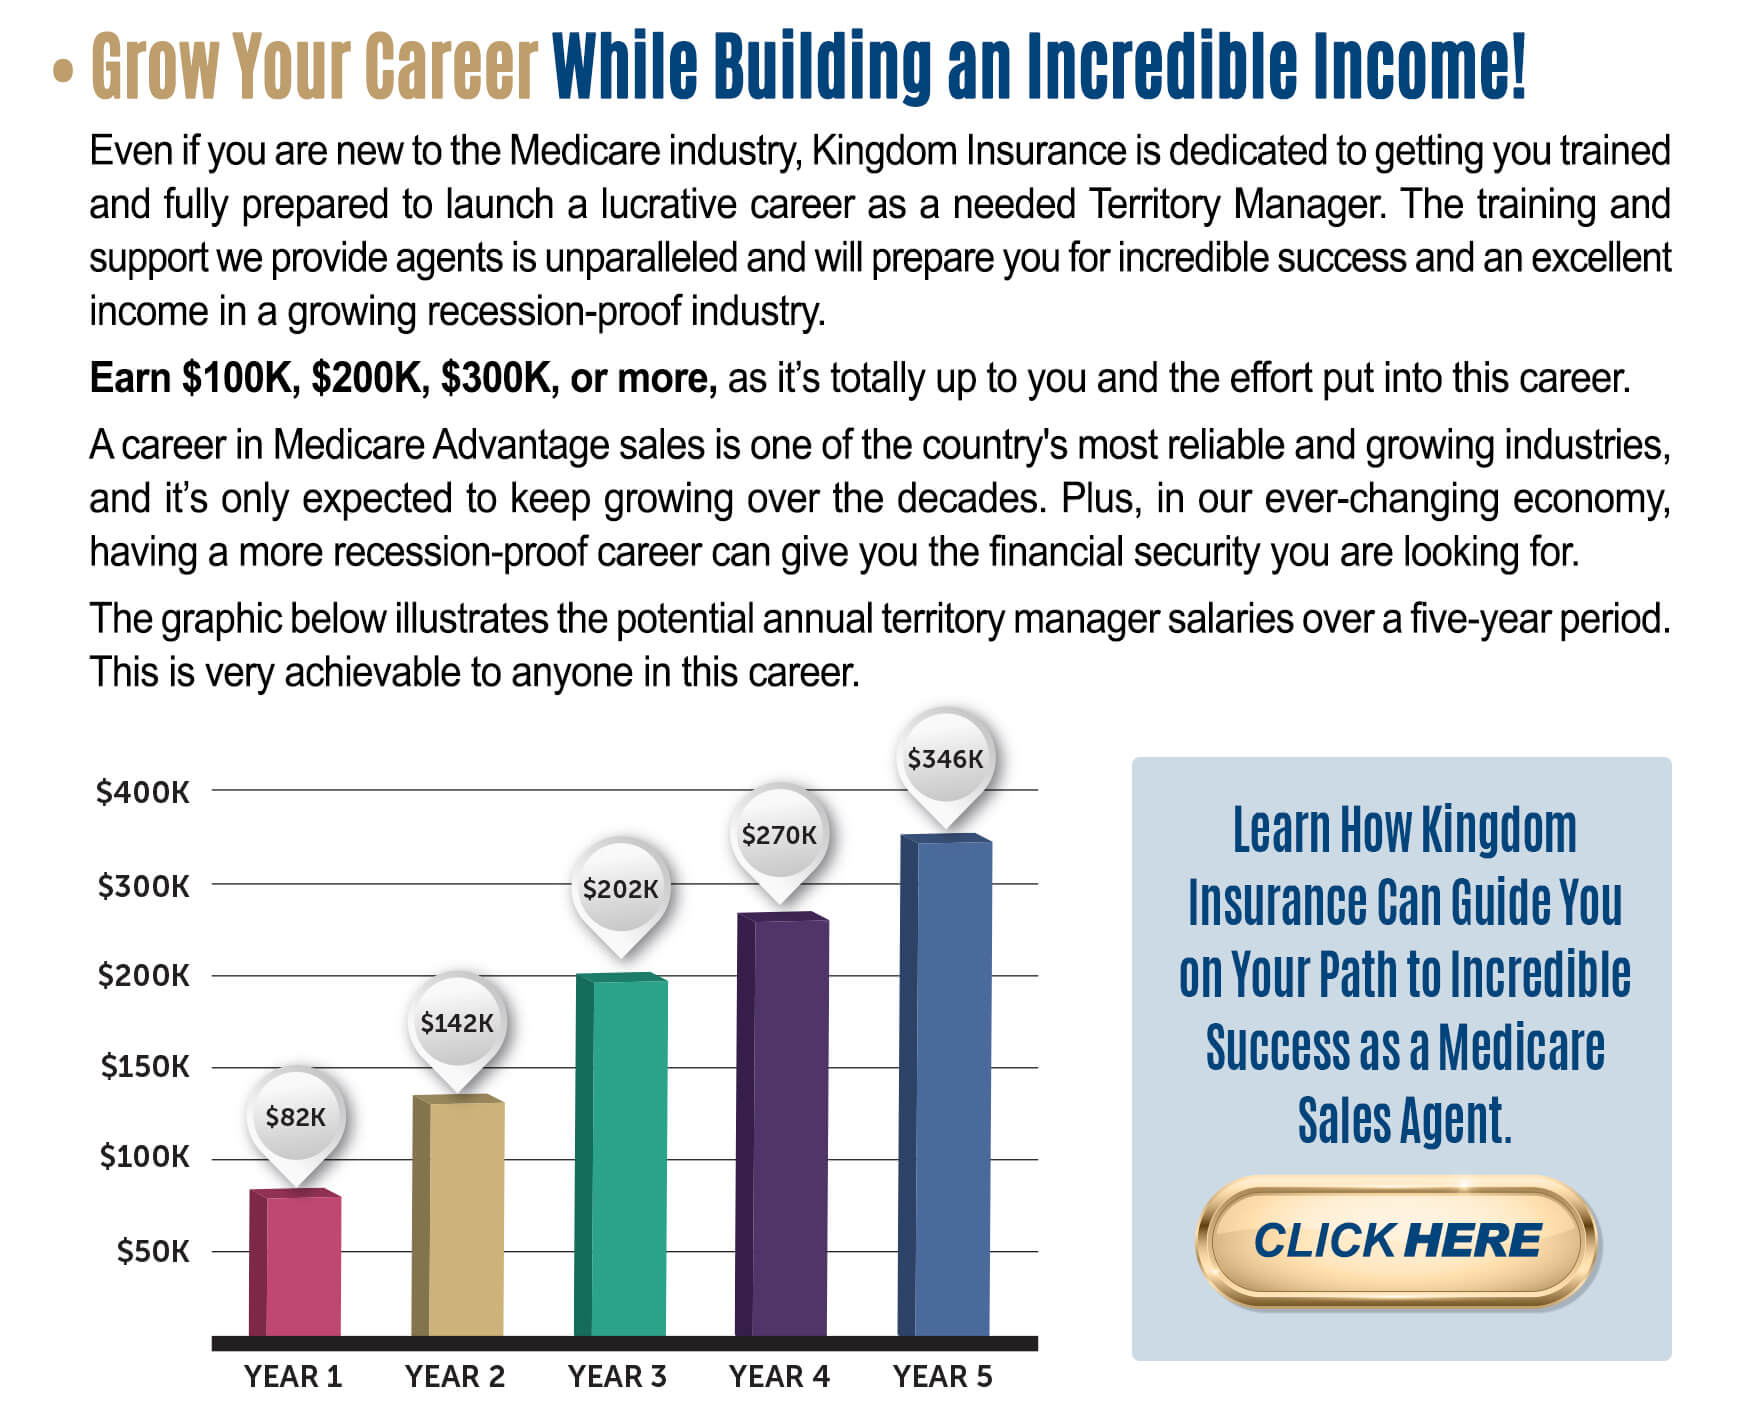 Grow Your Career While Building an Incredible Income! Even if you are new to the Medicare industry, Kingdom Insurance is dedicated to getting you trained and fully prepared to launch a lucrative career as a needed Territory Manager. The training and support we provide agents is unparalleled and will prepare you for incredible success and an excellent income in a growing recession-proof industry. Earn $100K, $200K, $300K, or more, as it's totally up to you and the effort put into this career. A career in Medicare Advantage sales is one of the country's most reliable and growing industries, and it's only expected to keep growing over the decades. Plus, in our ever-changing economy, having a more recession-proof career can give you the financial security you are looking for. This is very achievable to anyone in this career.